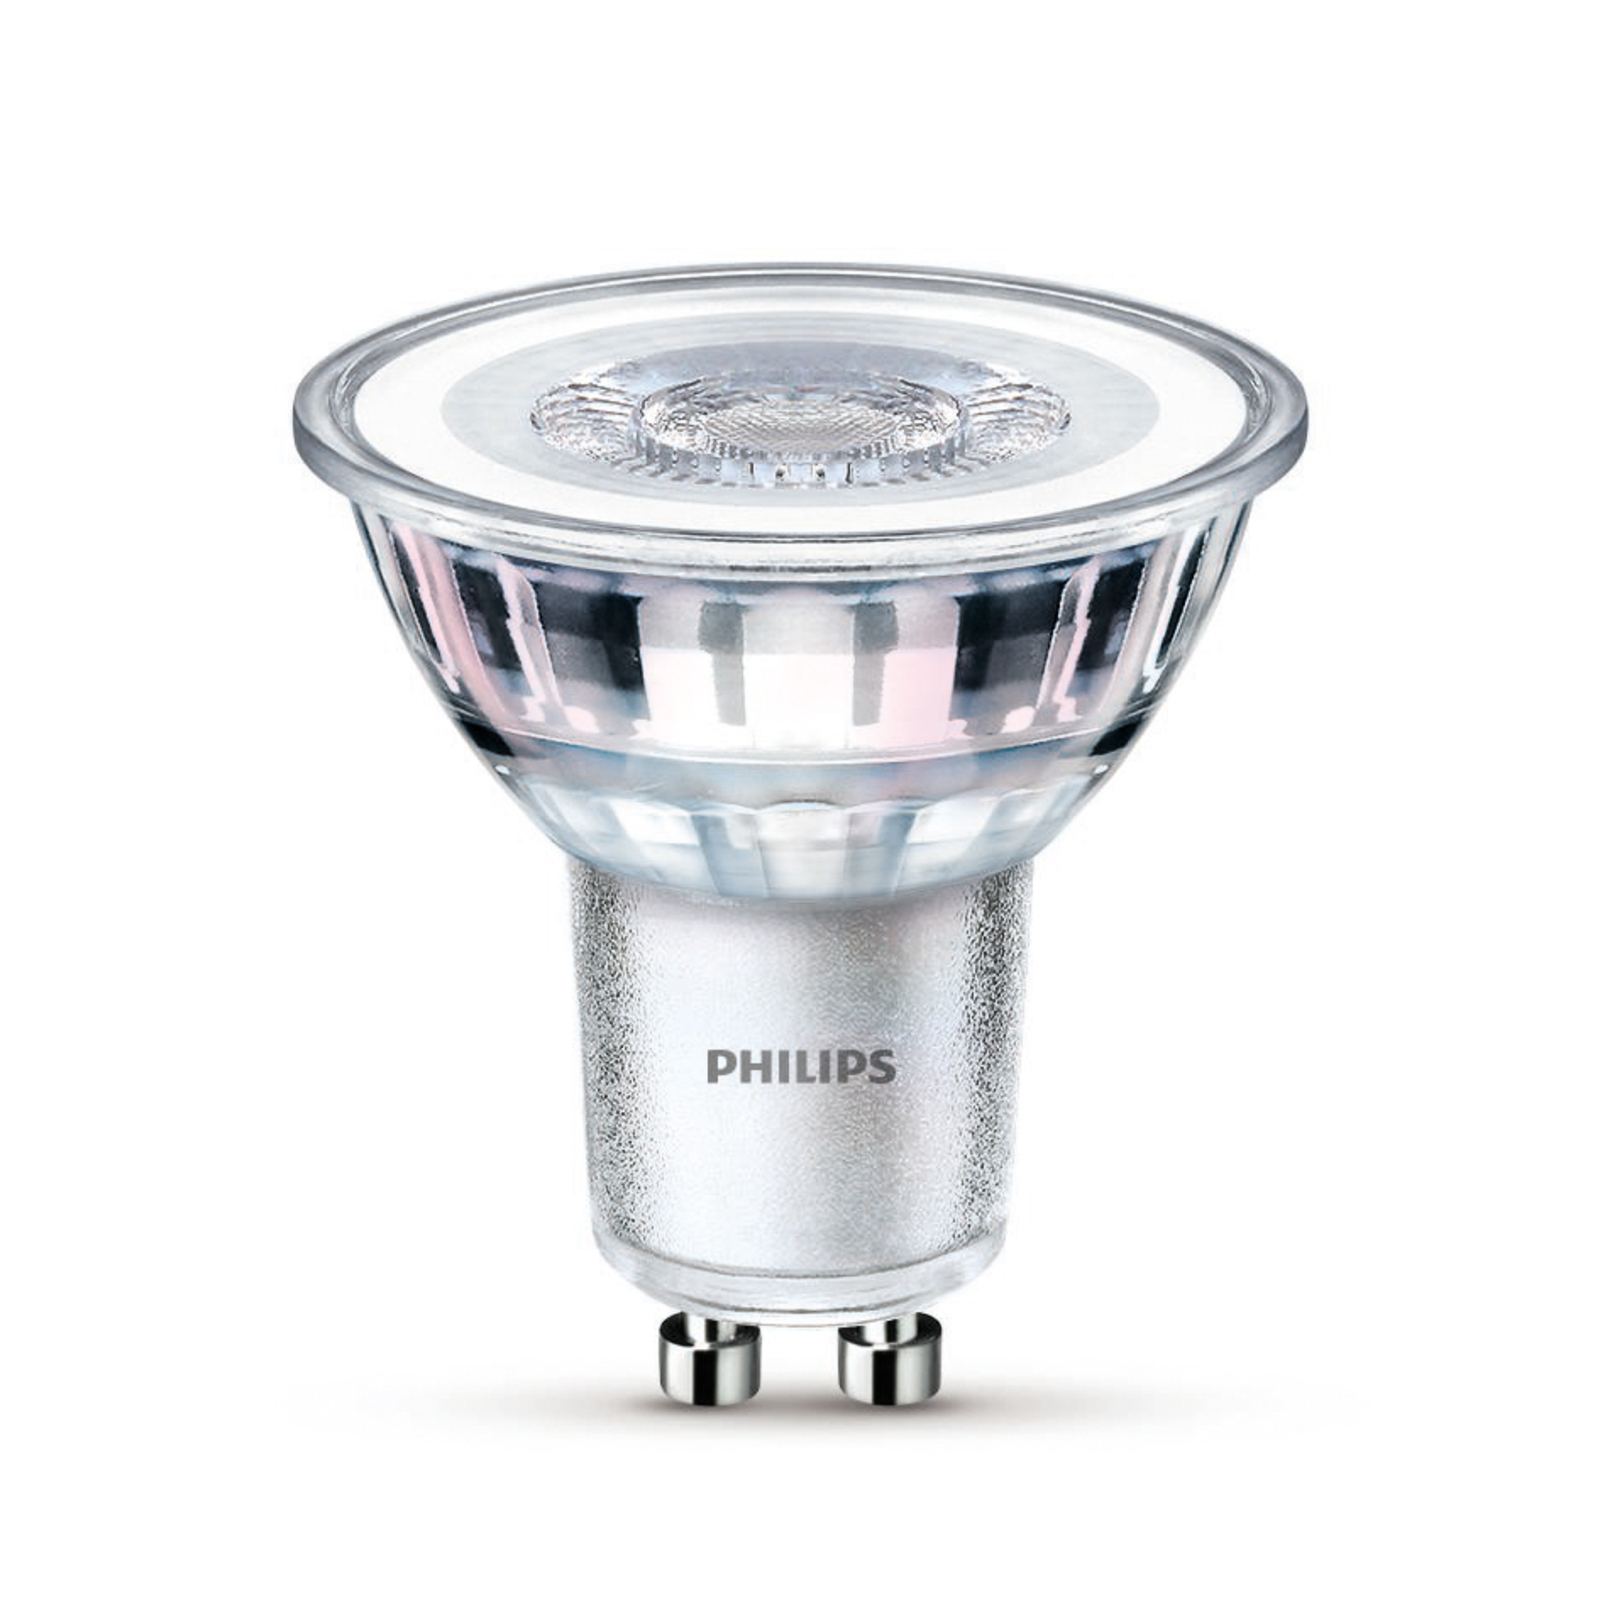 Philips LED GU10 4,6 W 390 lm 840 claire 36° x6